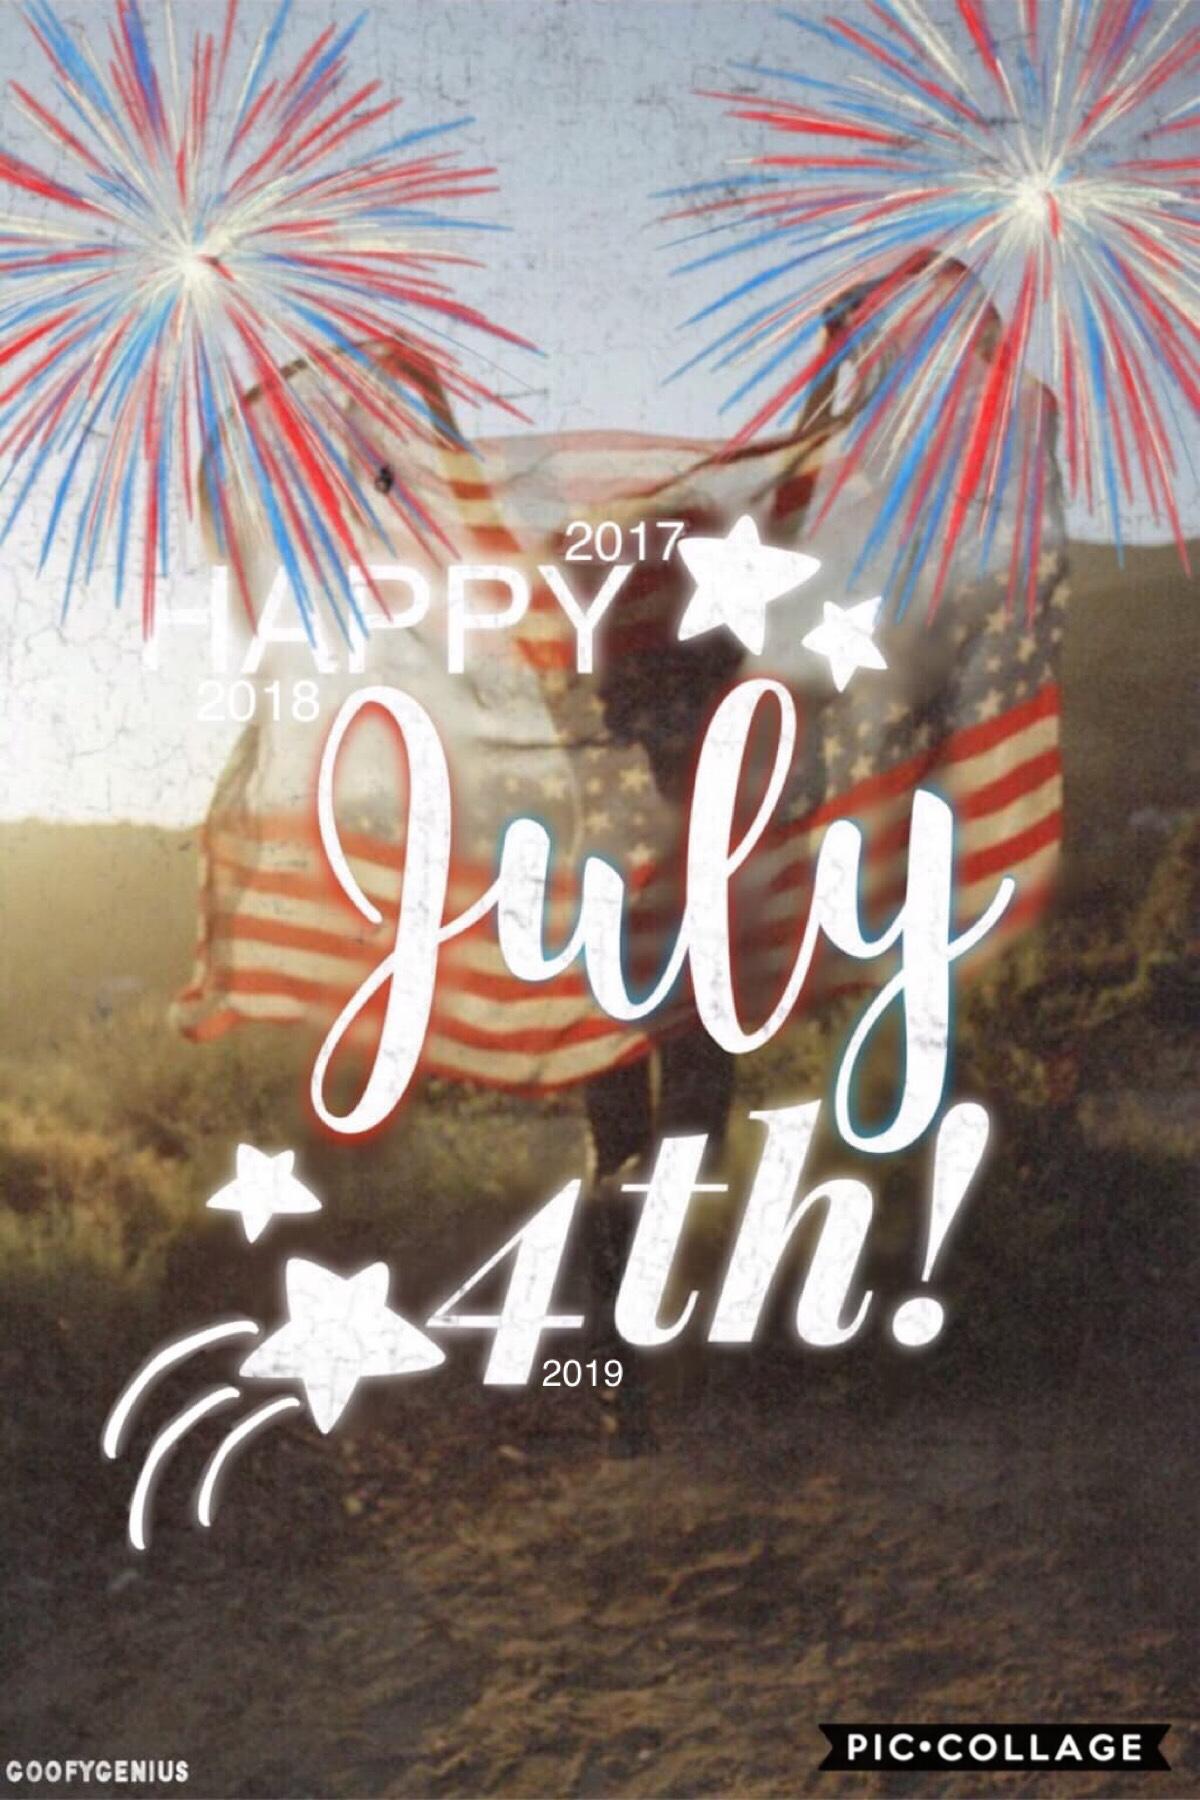 💥Tap Here💥
Happy 4th! Remember? I’m going to post this collage every year! Are you sick of it yet? It’s only been 3 years, LOL. Rate 1-10 please.
QOTD: Hot or Cold?
AOTD: Cold